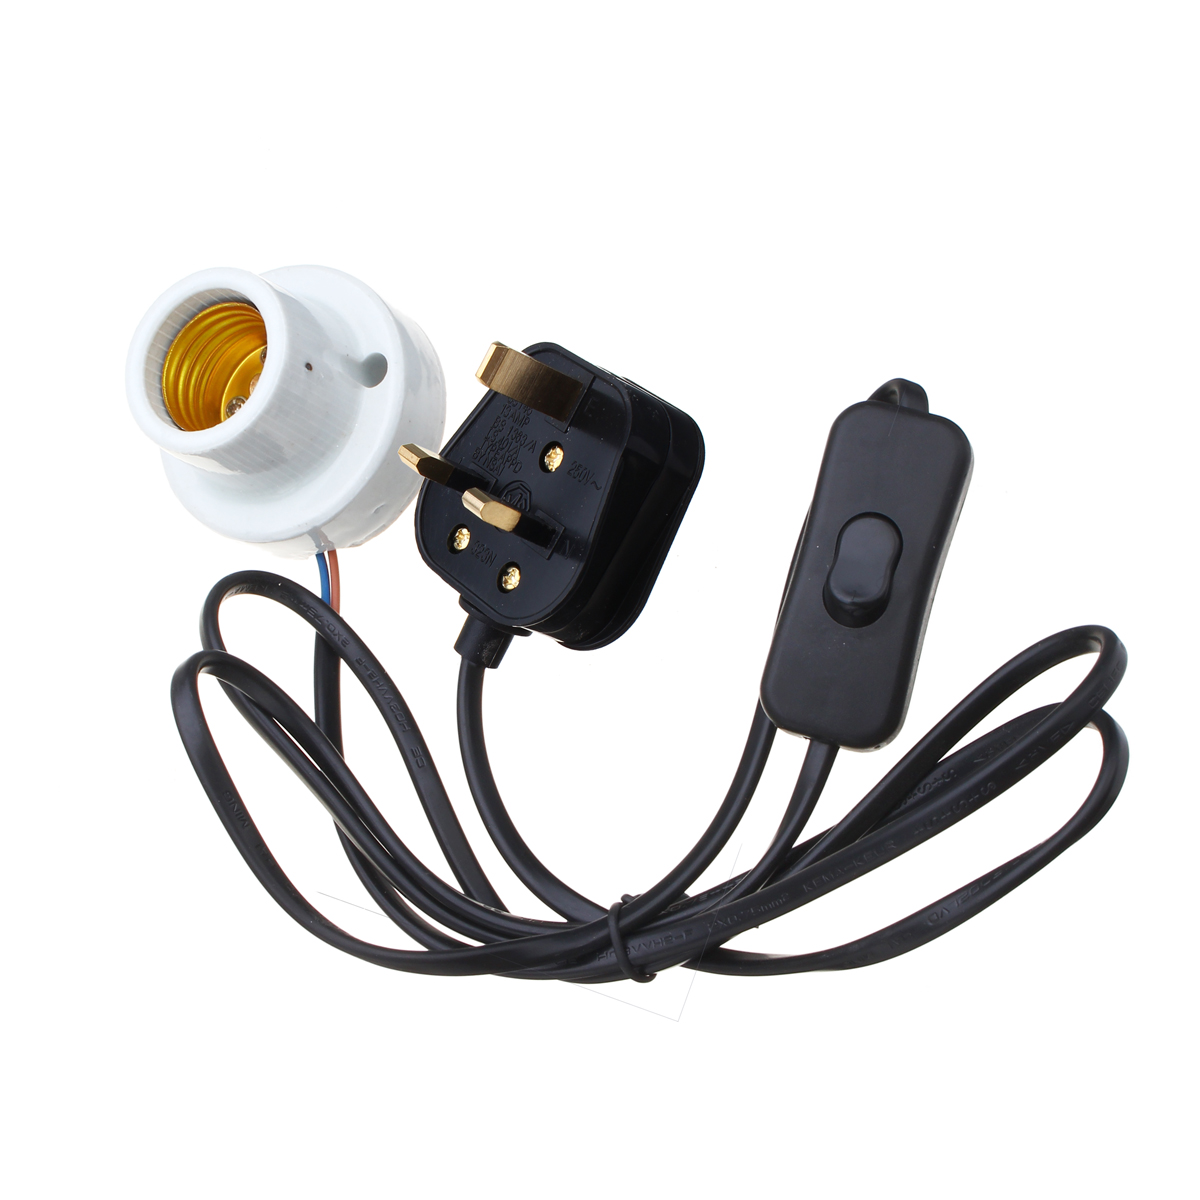 E27-Straight-Mouth-Reptile-Ceramic-Heat-Lampholder-Bulb-Adapter-with-Switch-AC110-240V-1287370-2